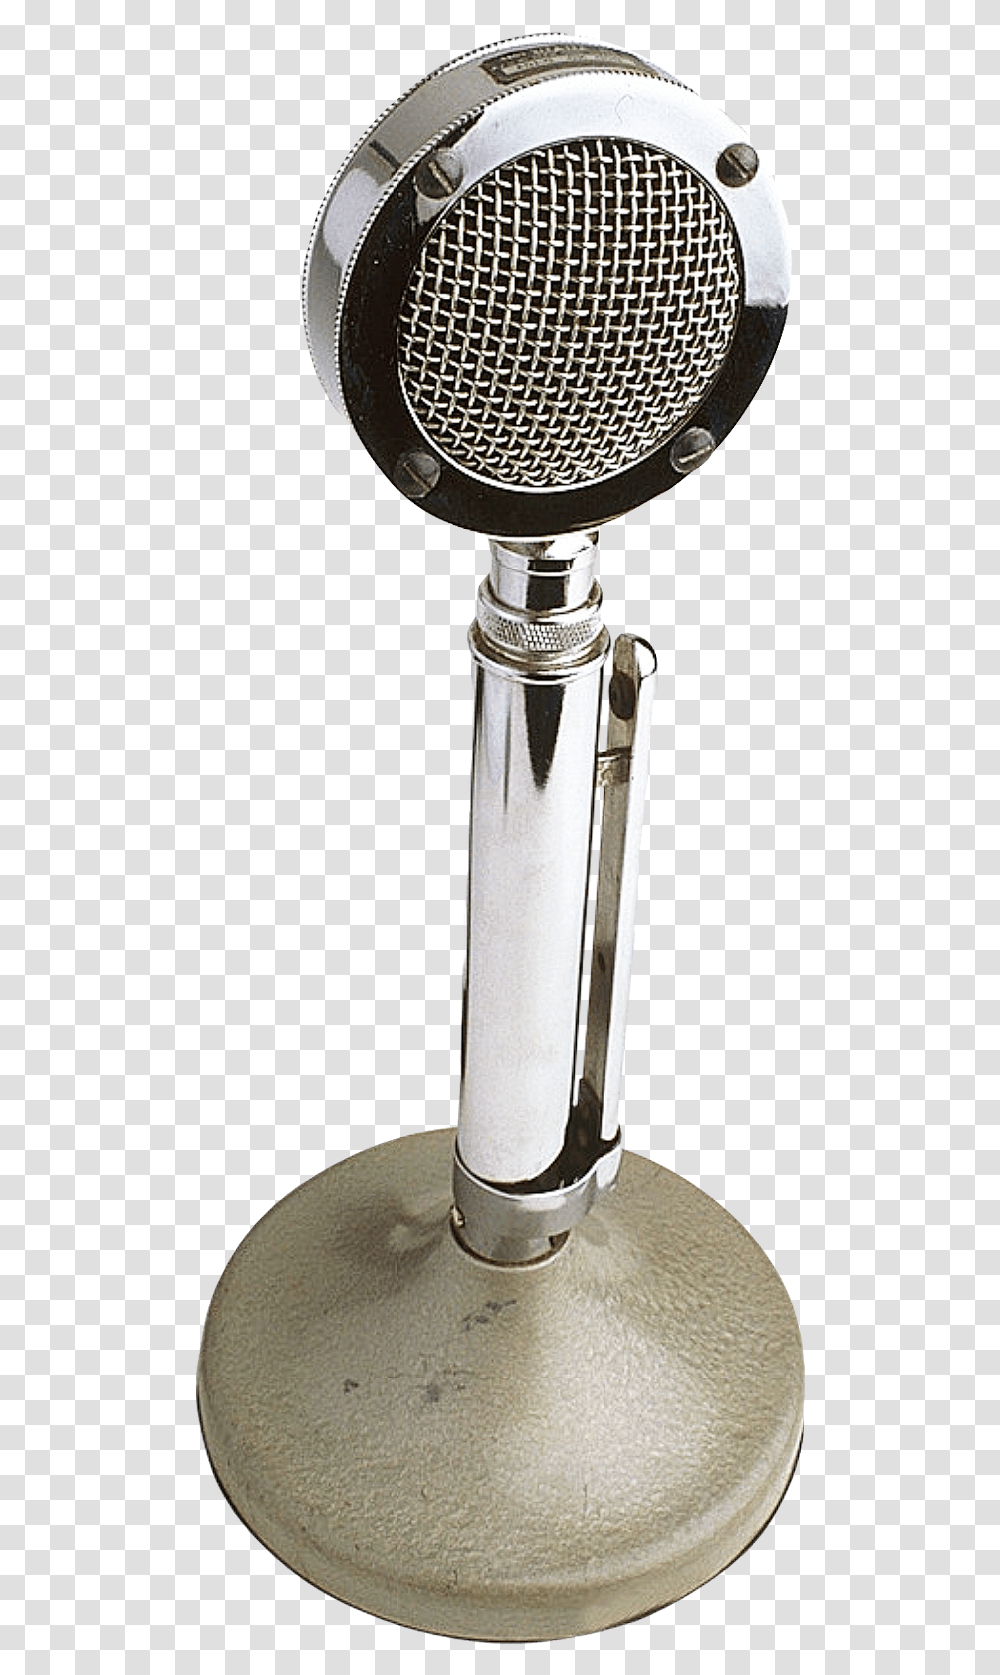 Microphone Image Pngpix Wireless Microphone, Lamp, Bottle, Lighter, Crystal Transparent Png